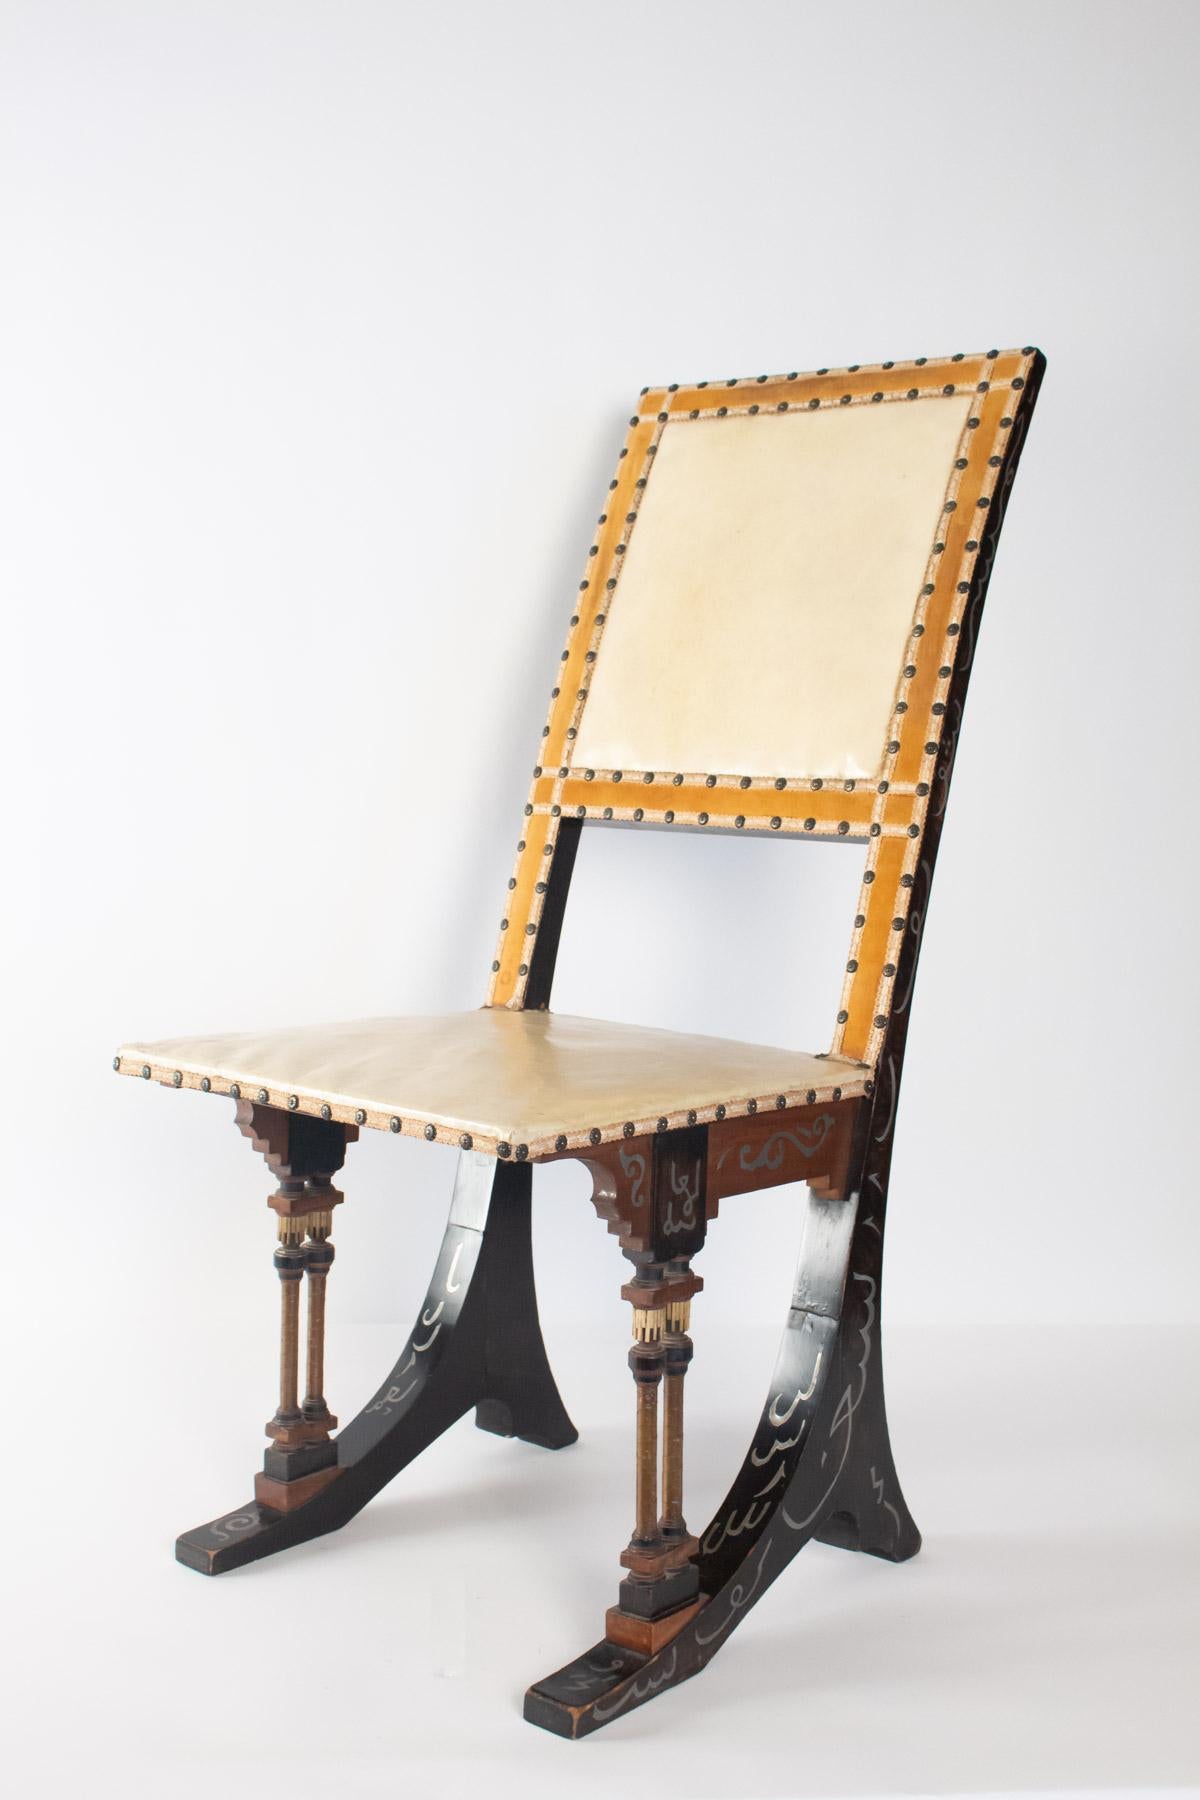 Copper Pair of Chairs from Carlo Bugatti, 1880-1890